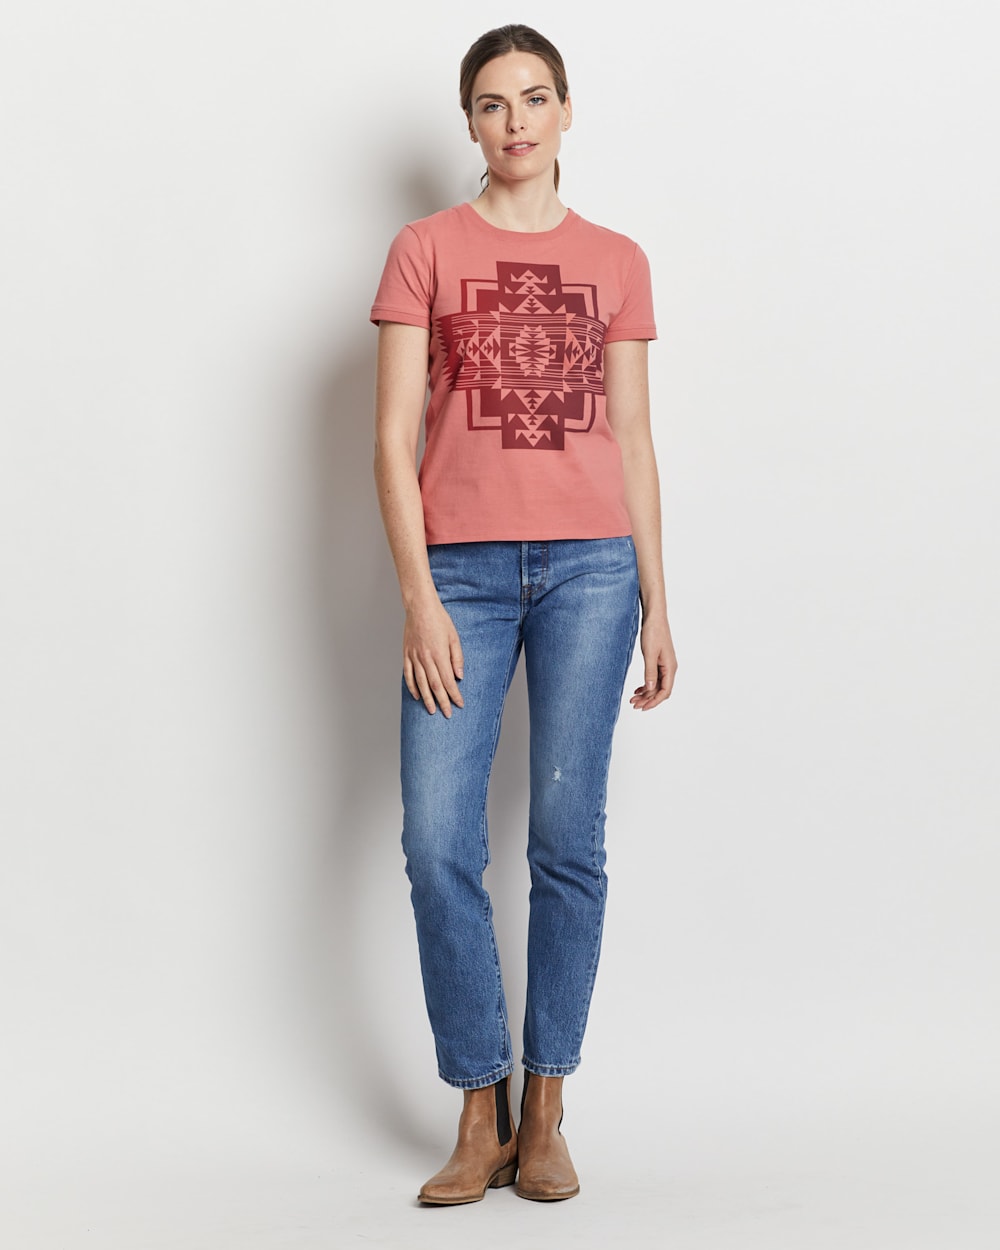 WOMEN'S DESCHUTES GRAPHIC TEE IN FADED ROSE CHIEF JOSEPH image number 1